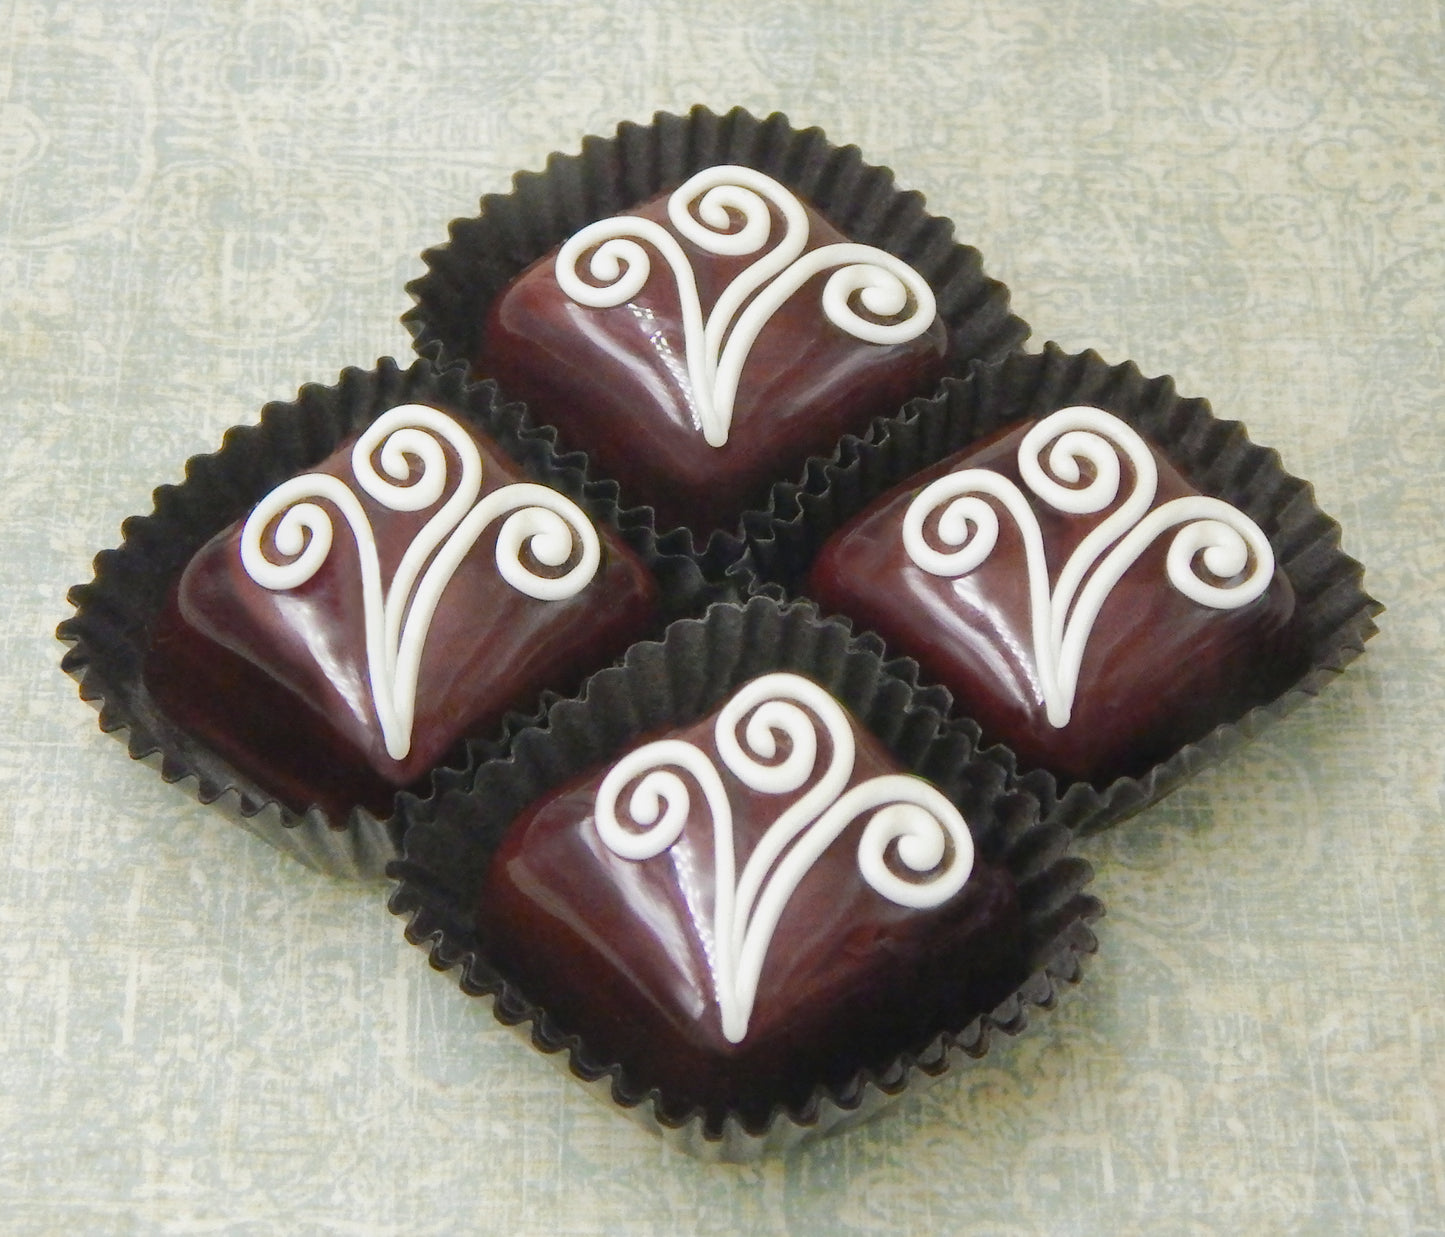 Chocolate Treats with Curls (16-105+)